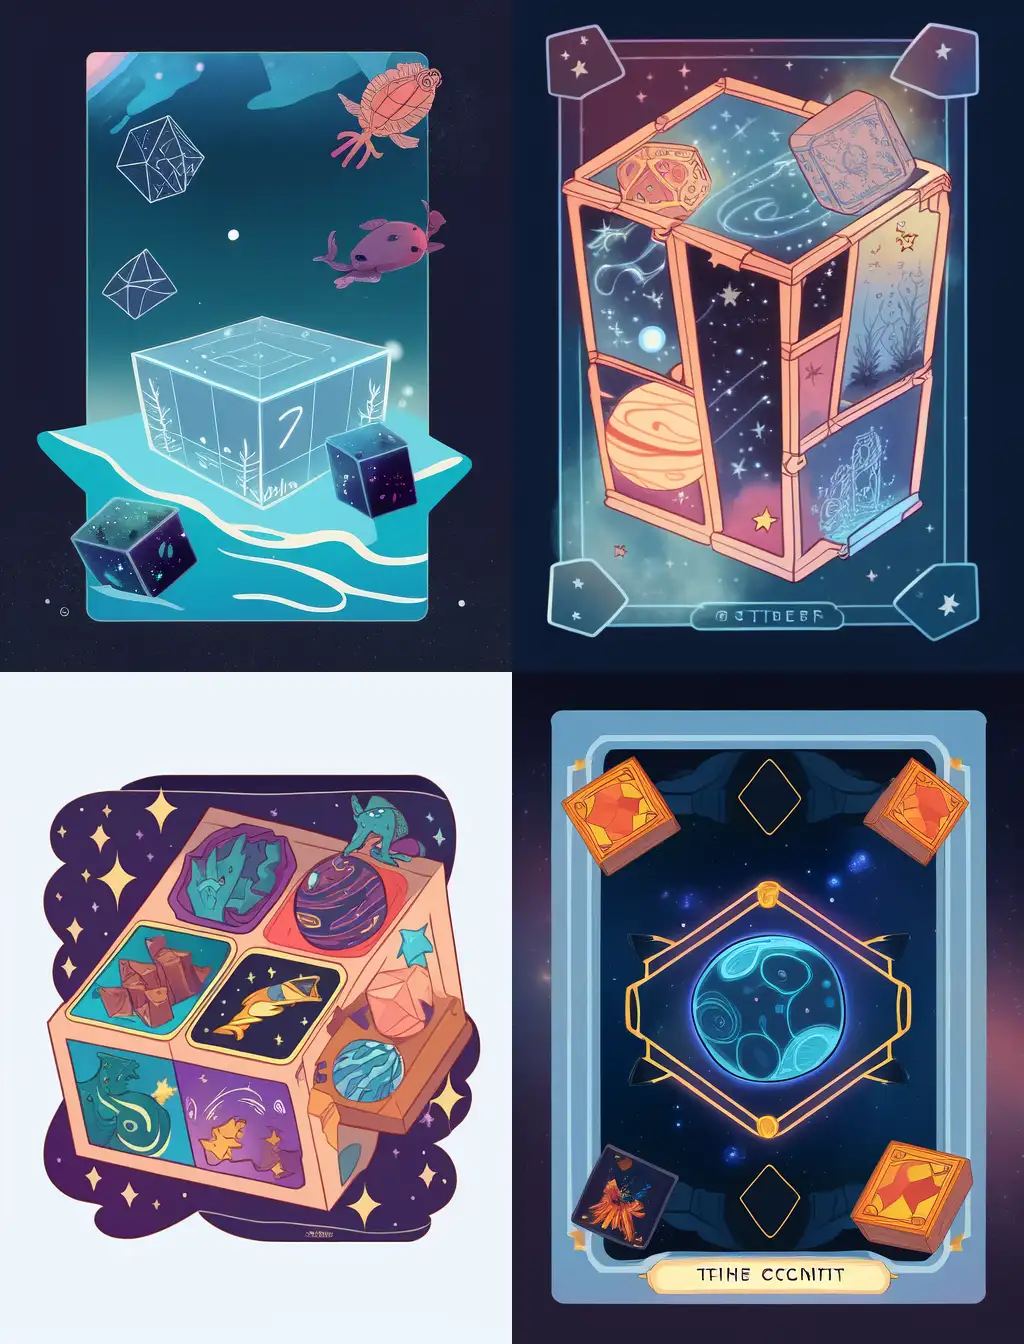 draw a rectangular box for tarot cards with zodiac signs, planets and elements